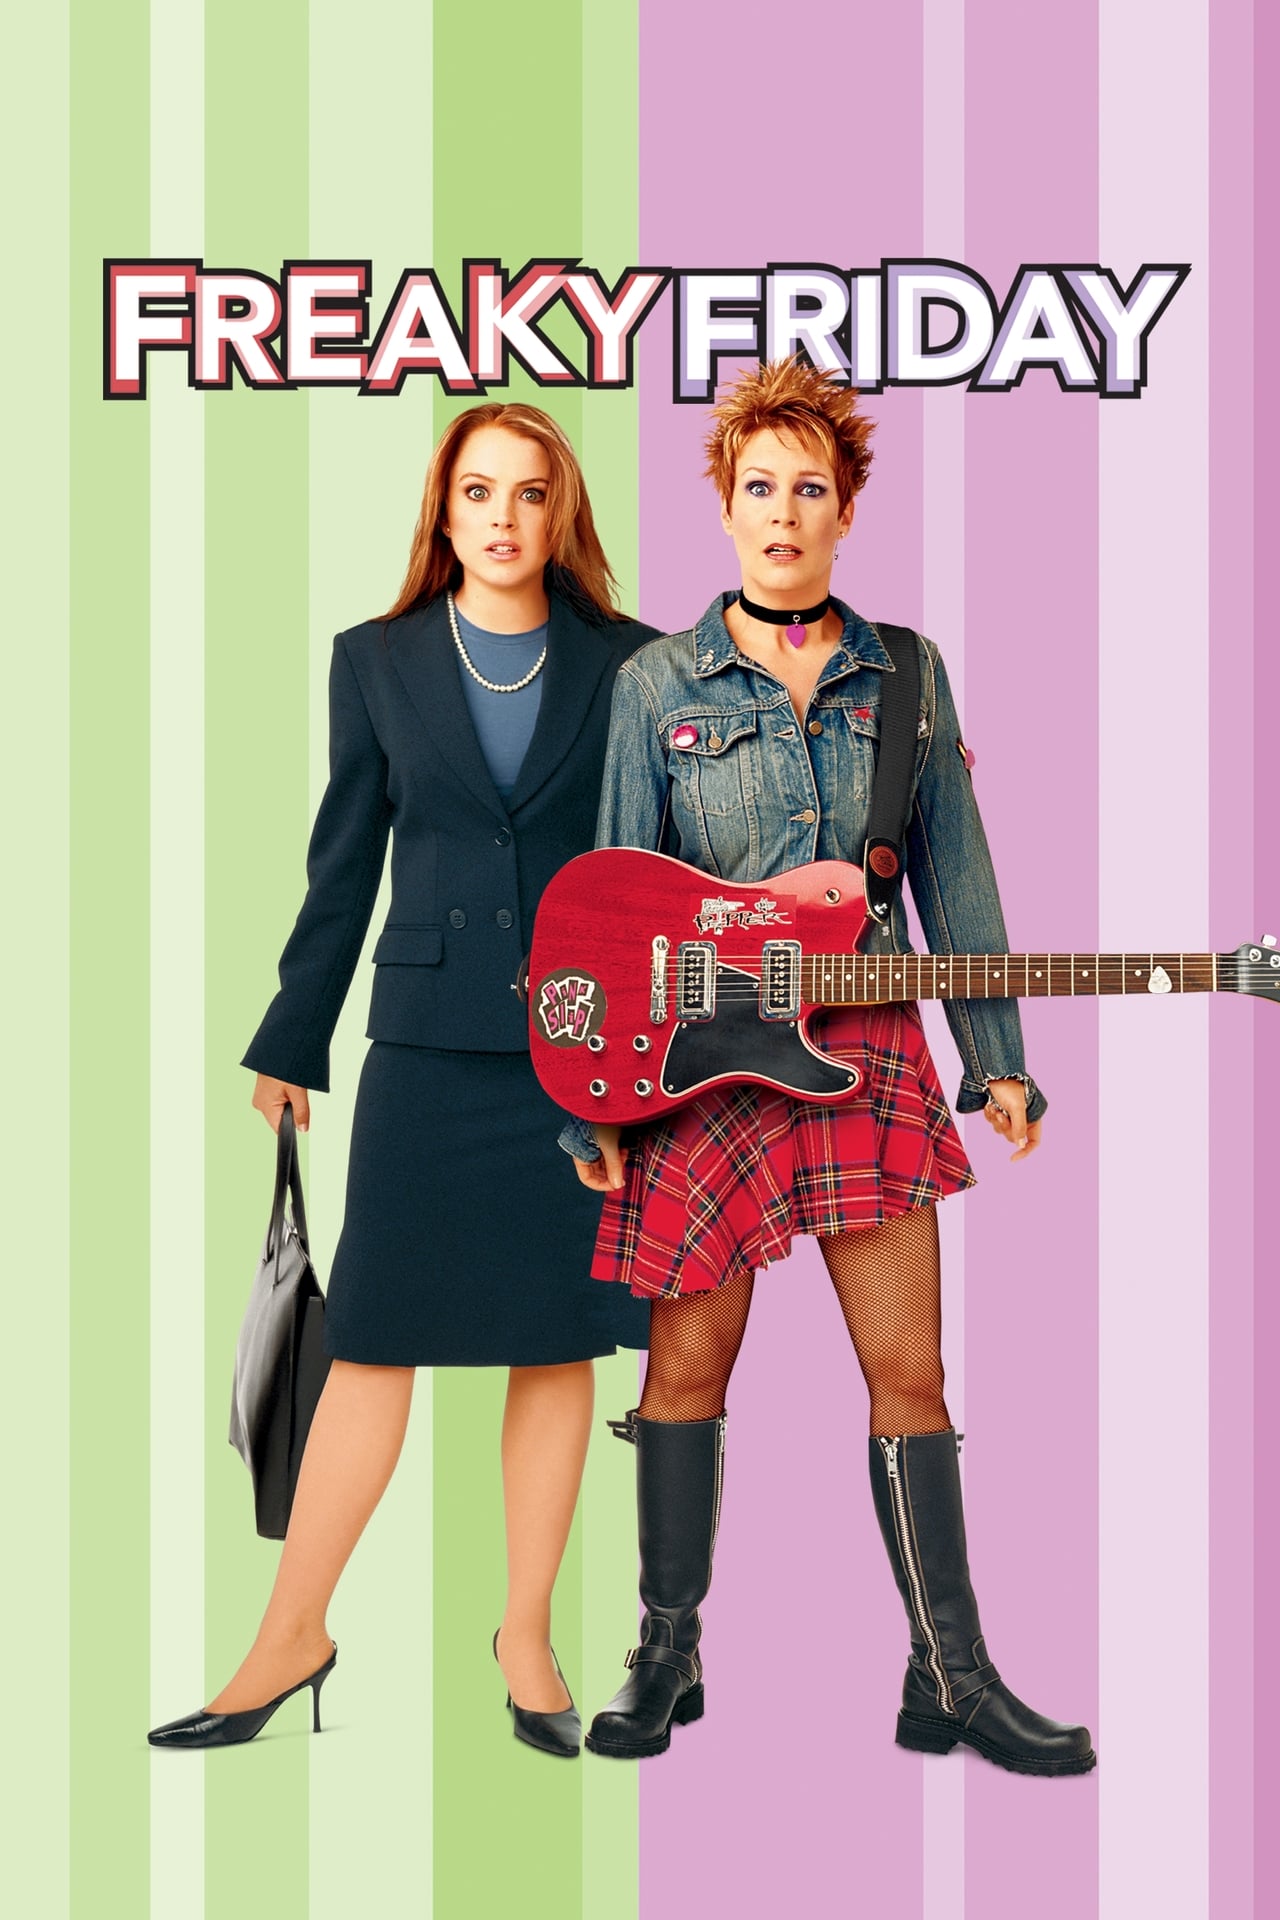 download freaky friday video